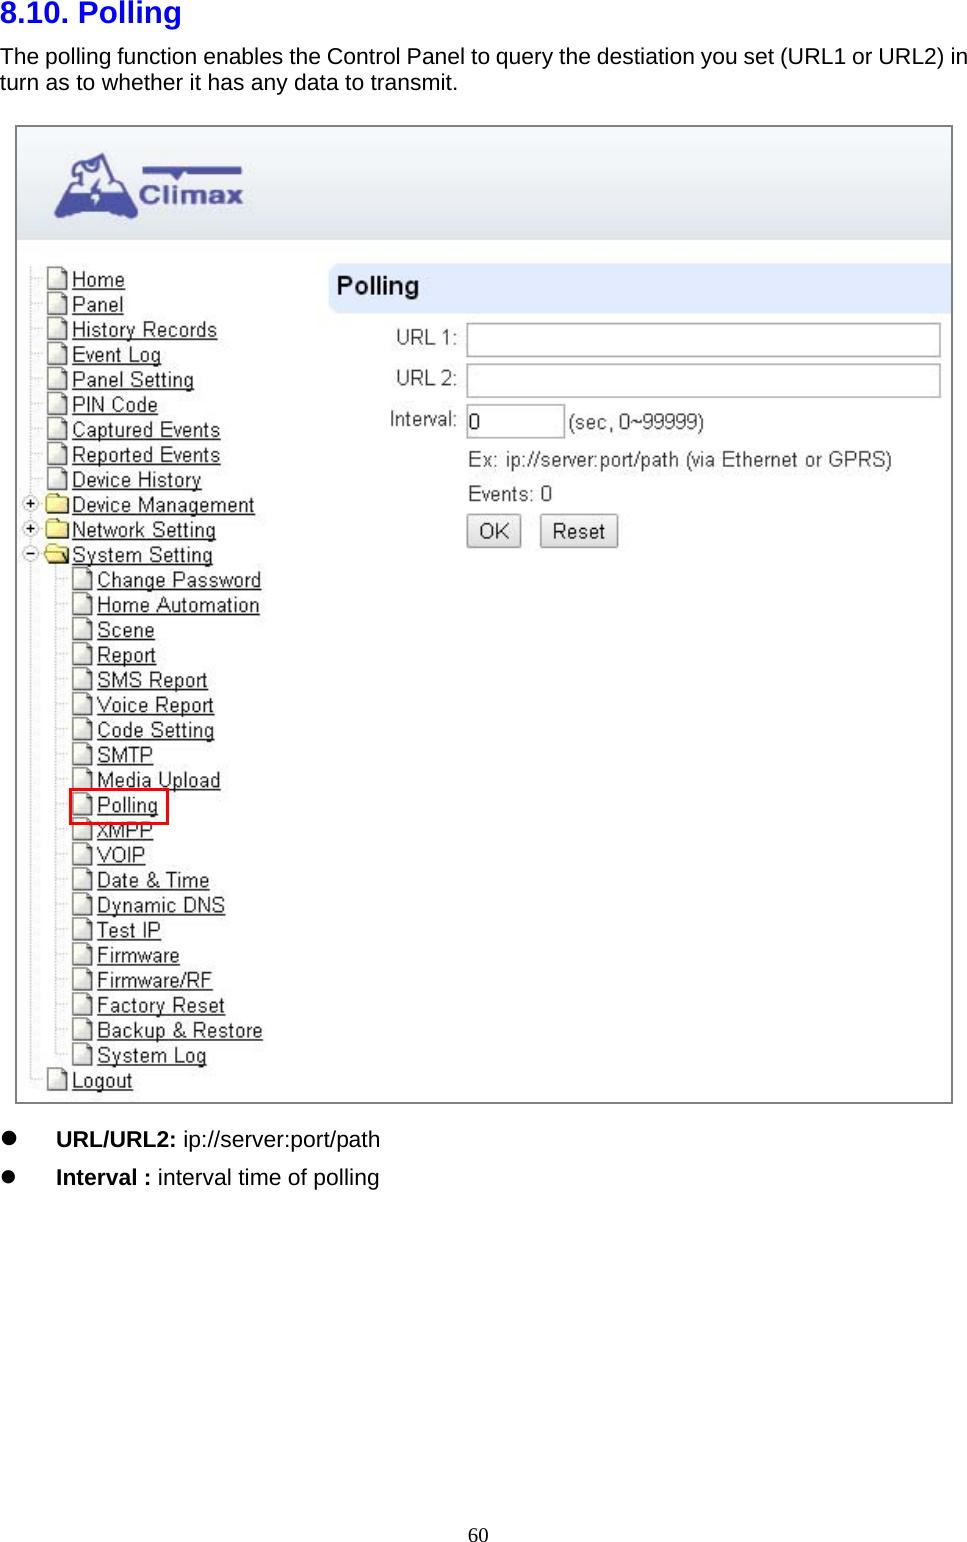  608.10. Polling    The polling function enables the Control Panel to query the destiation you set (URL1 or URL2) in turn as to whether it has any data to transmit.     URL/URL2: ip://server:port/path      Interval : interval time of polling                